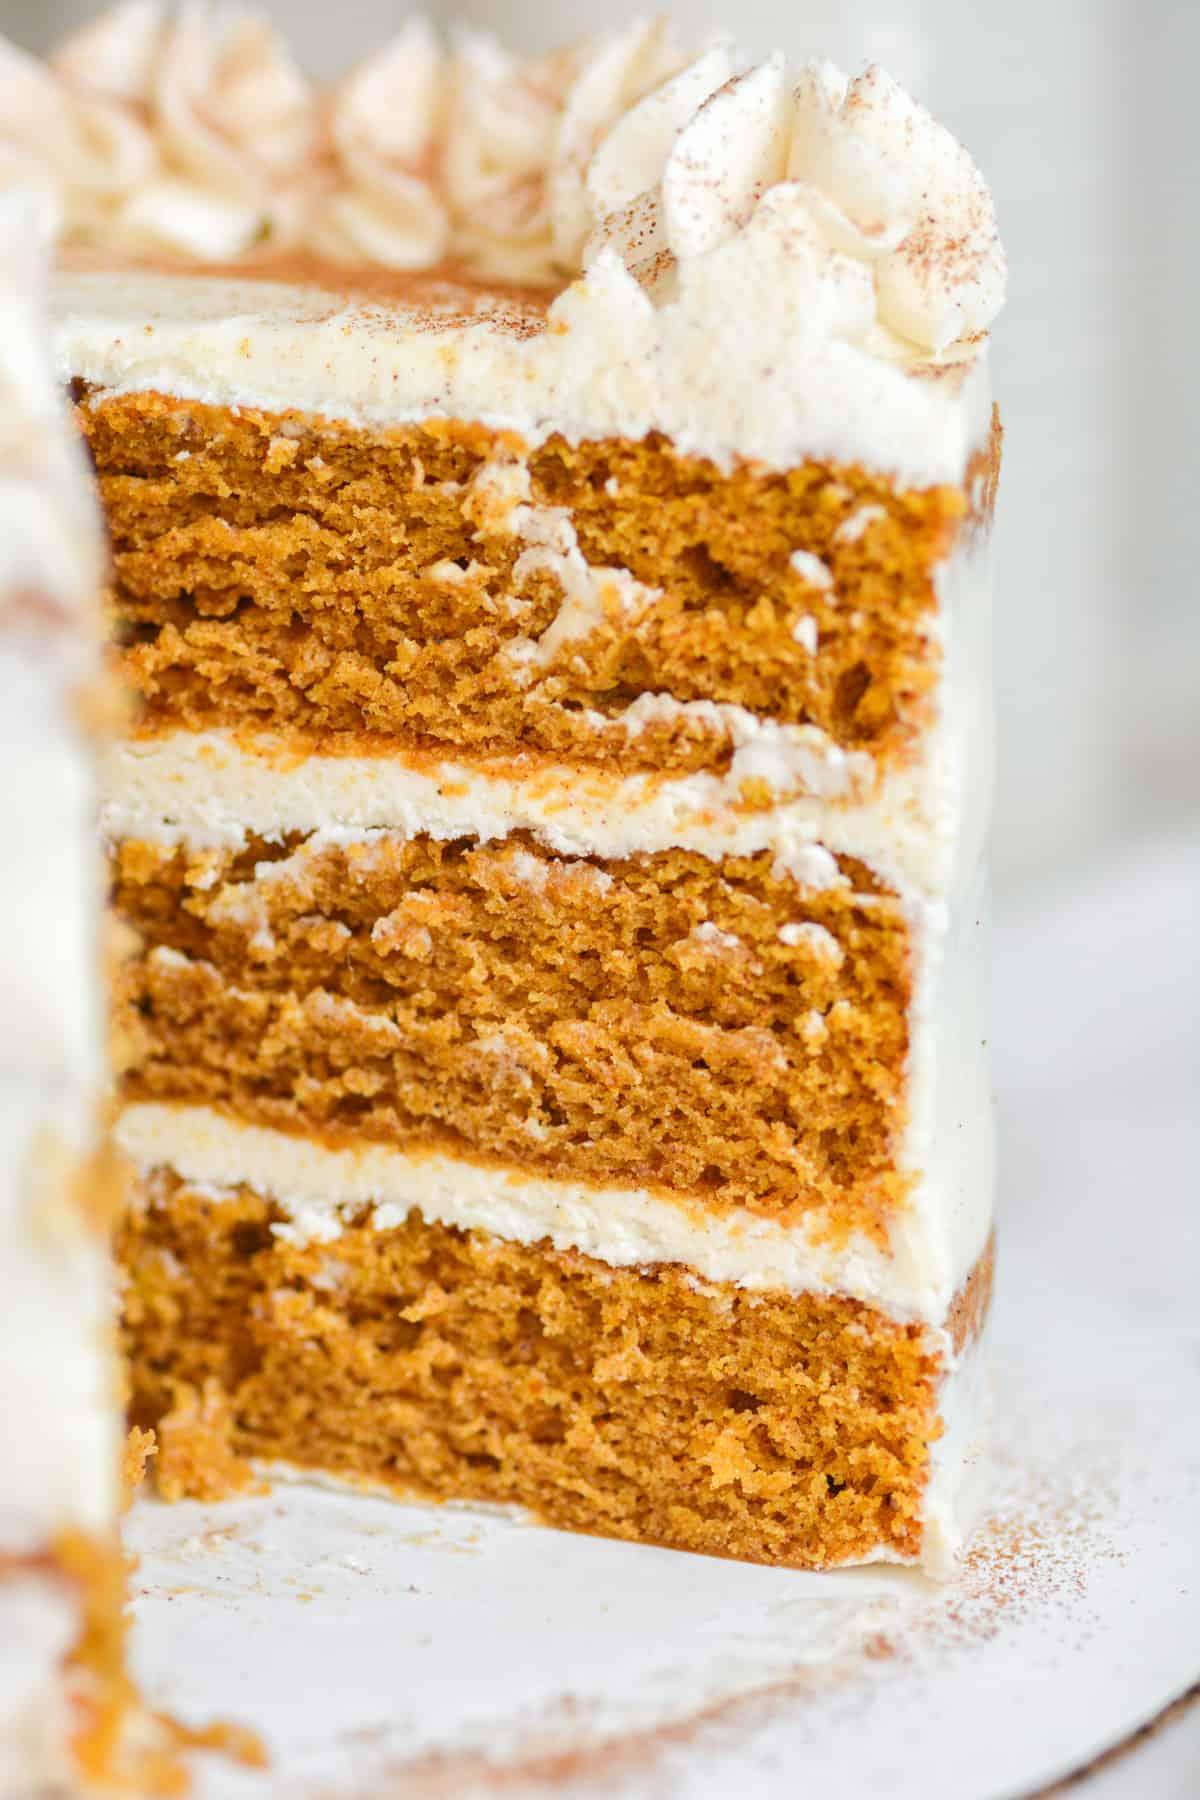 A cross-section of the Vegan Pumpkin Spice Layer Cake.